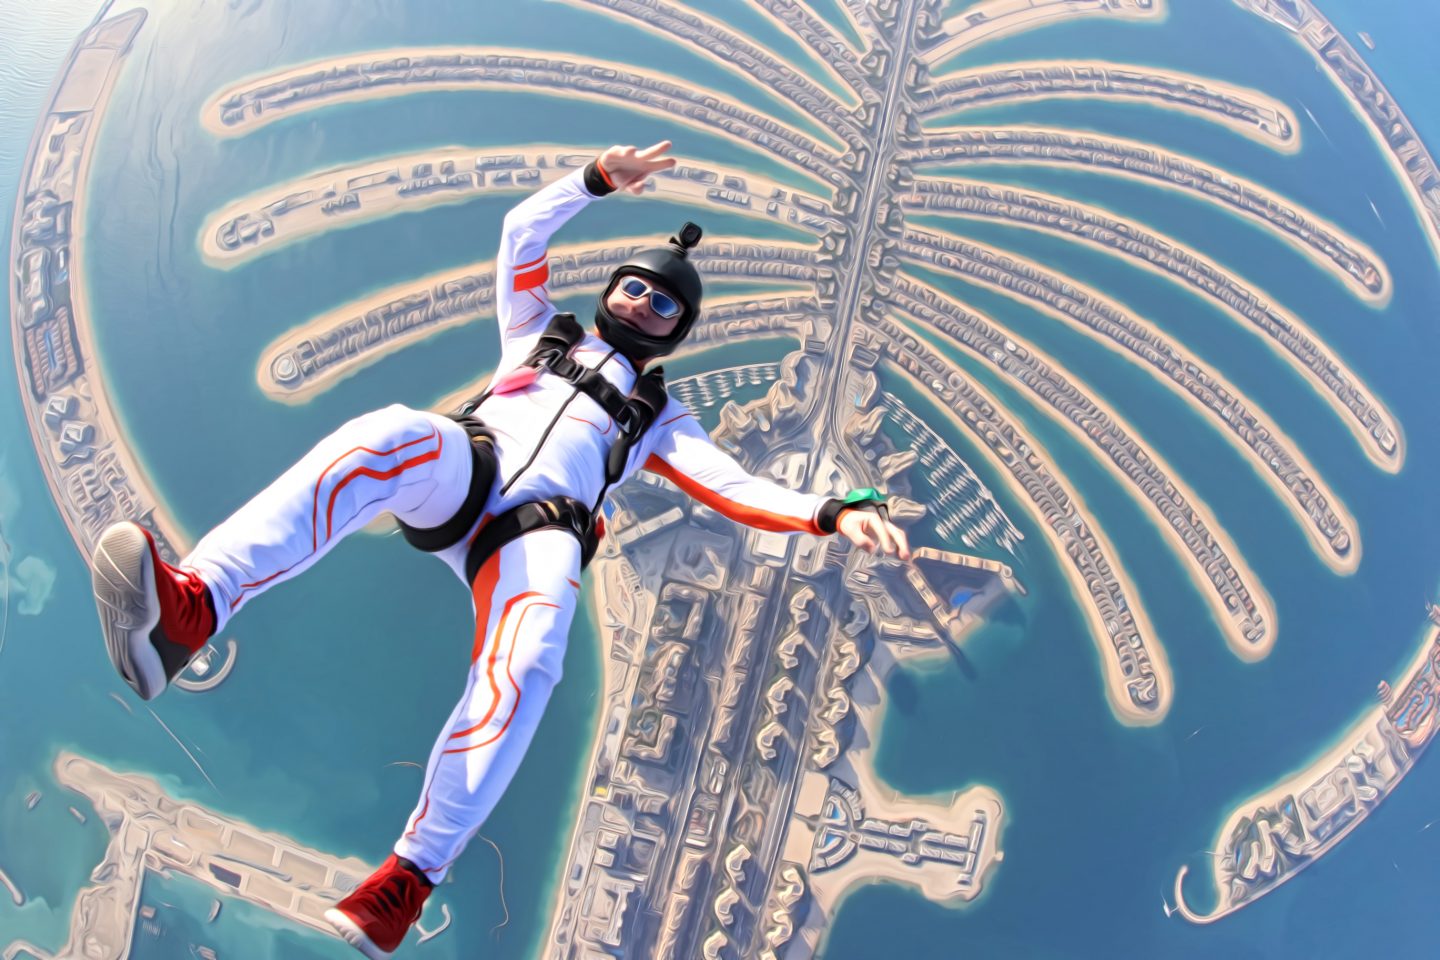 A tandem skydive over The Palm in Dubai you'll never forget